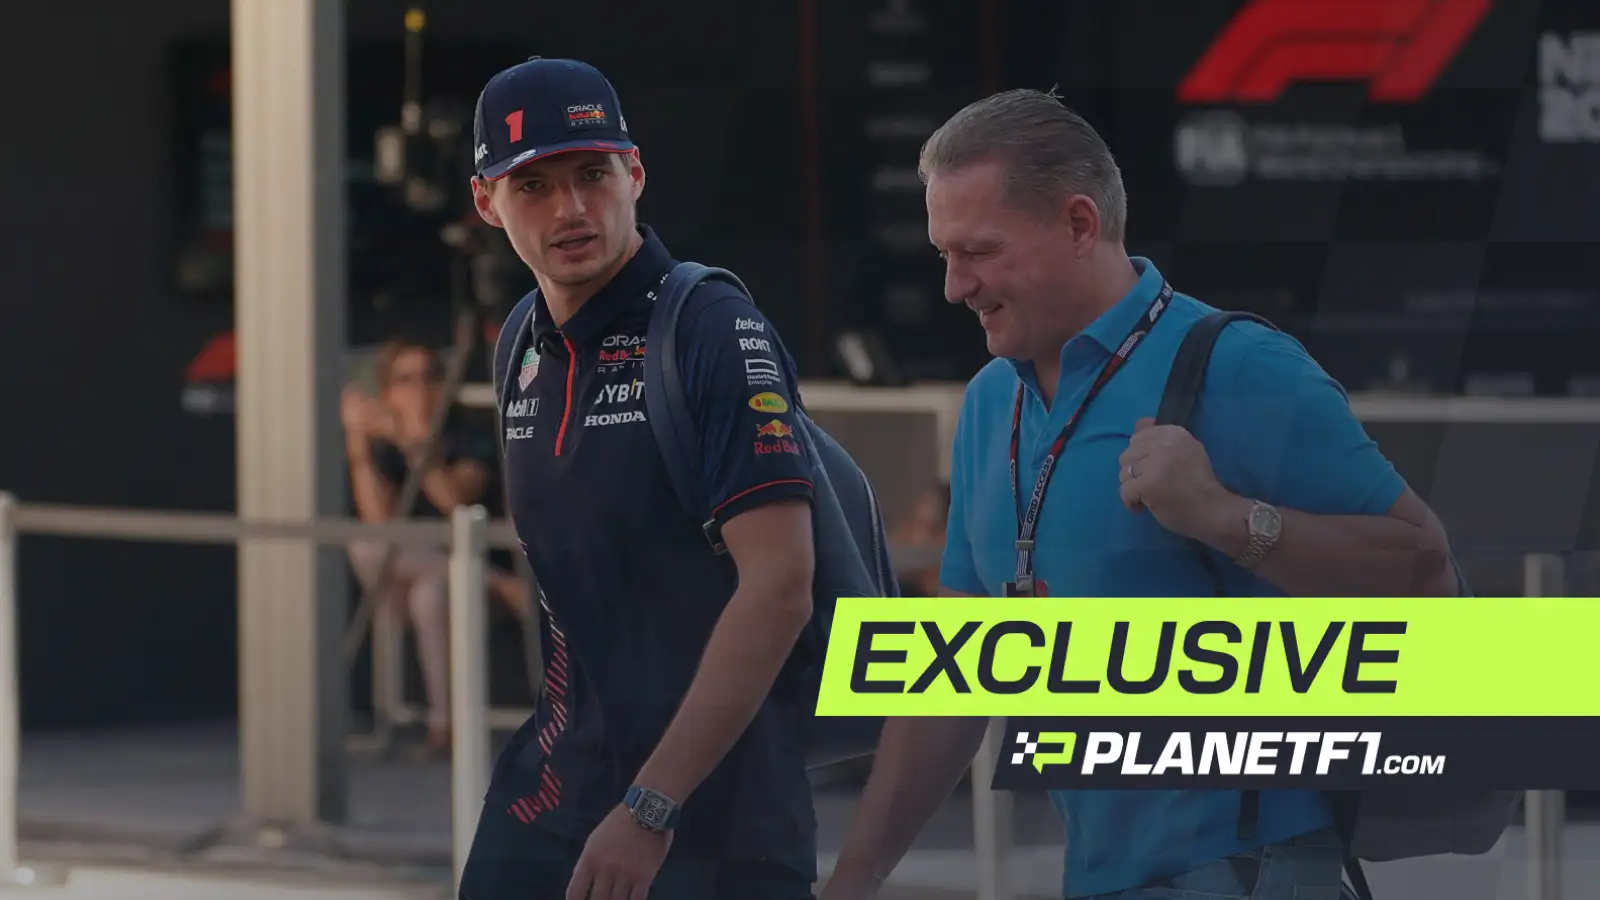 Jos and Max Verstappen walk through the F1 paddock together in Qatar.